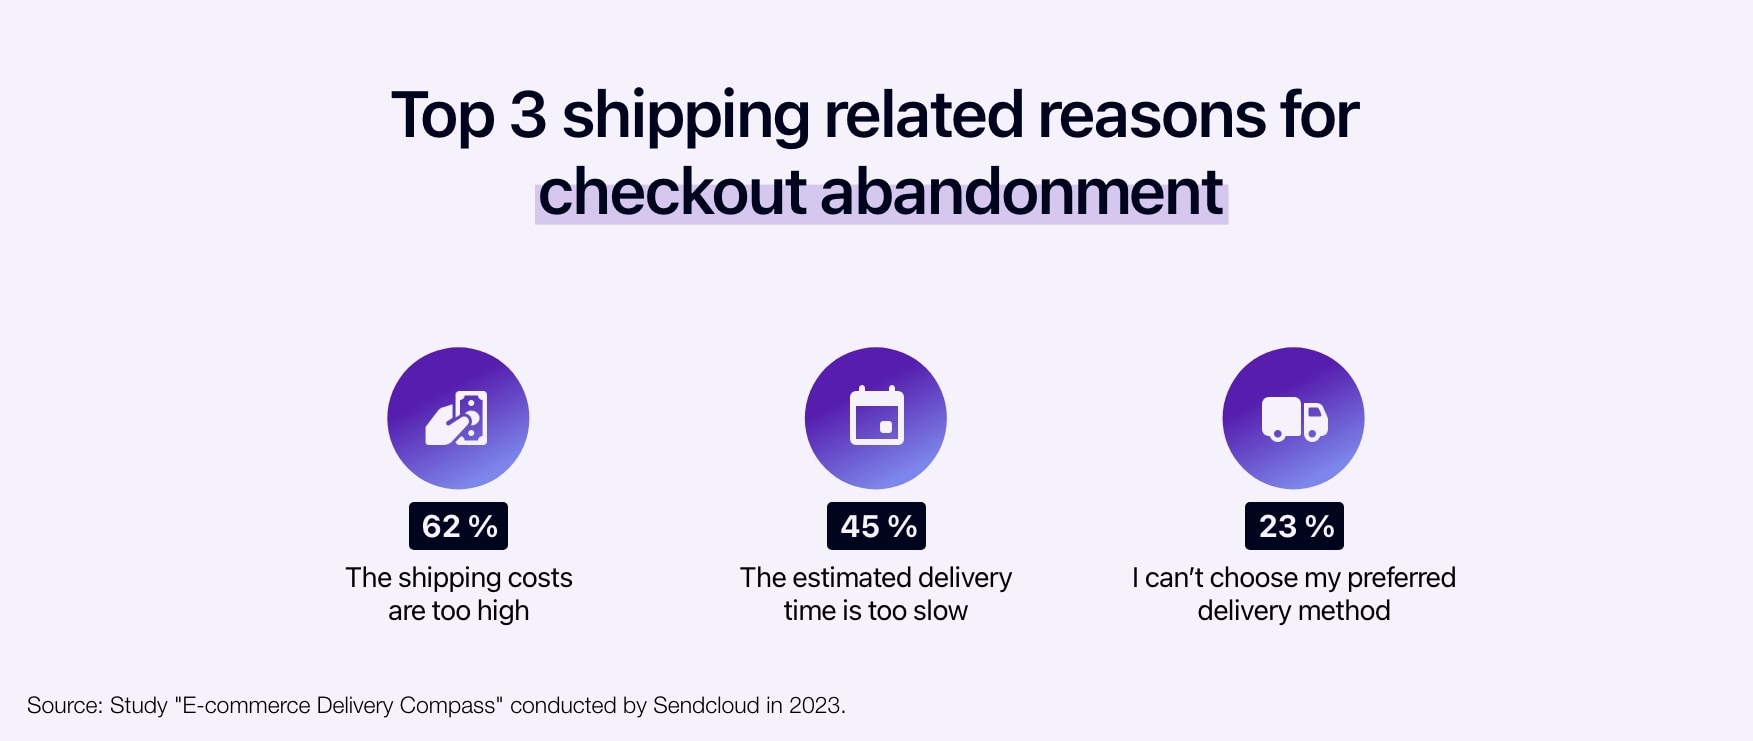 Diagram showing the top 3 shipping related reasons for checkout abandonment.